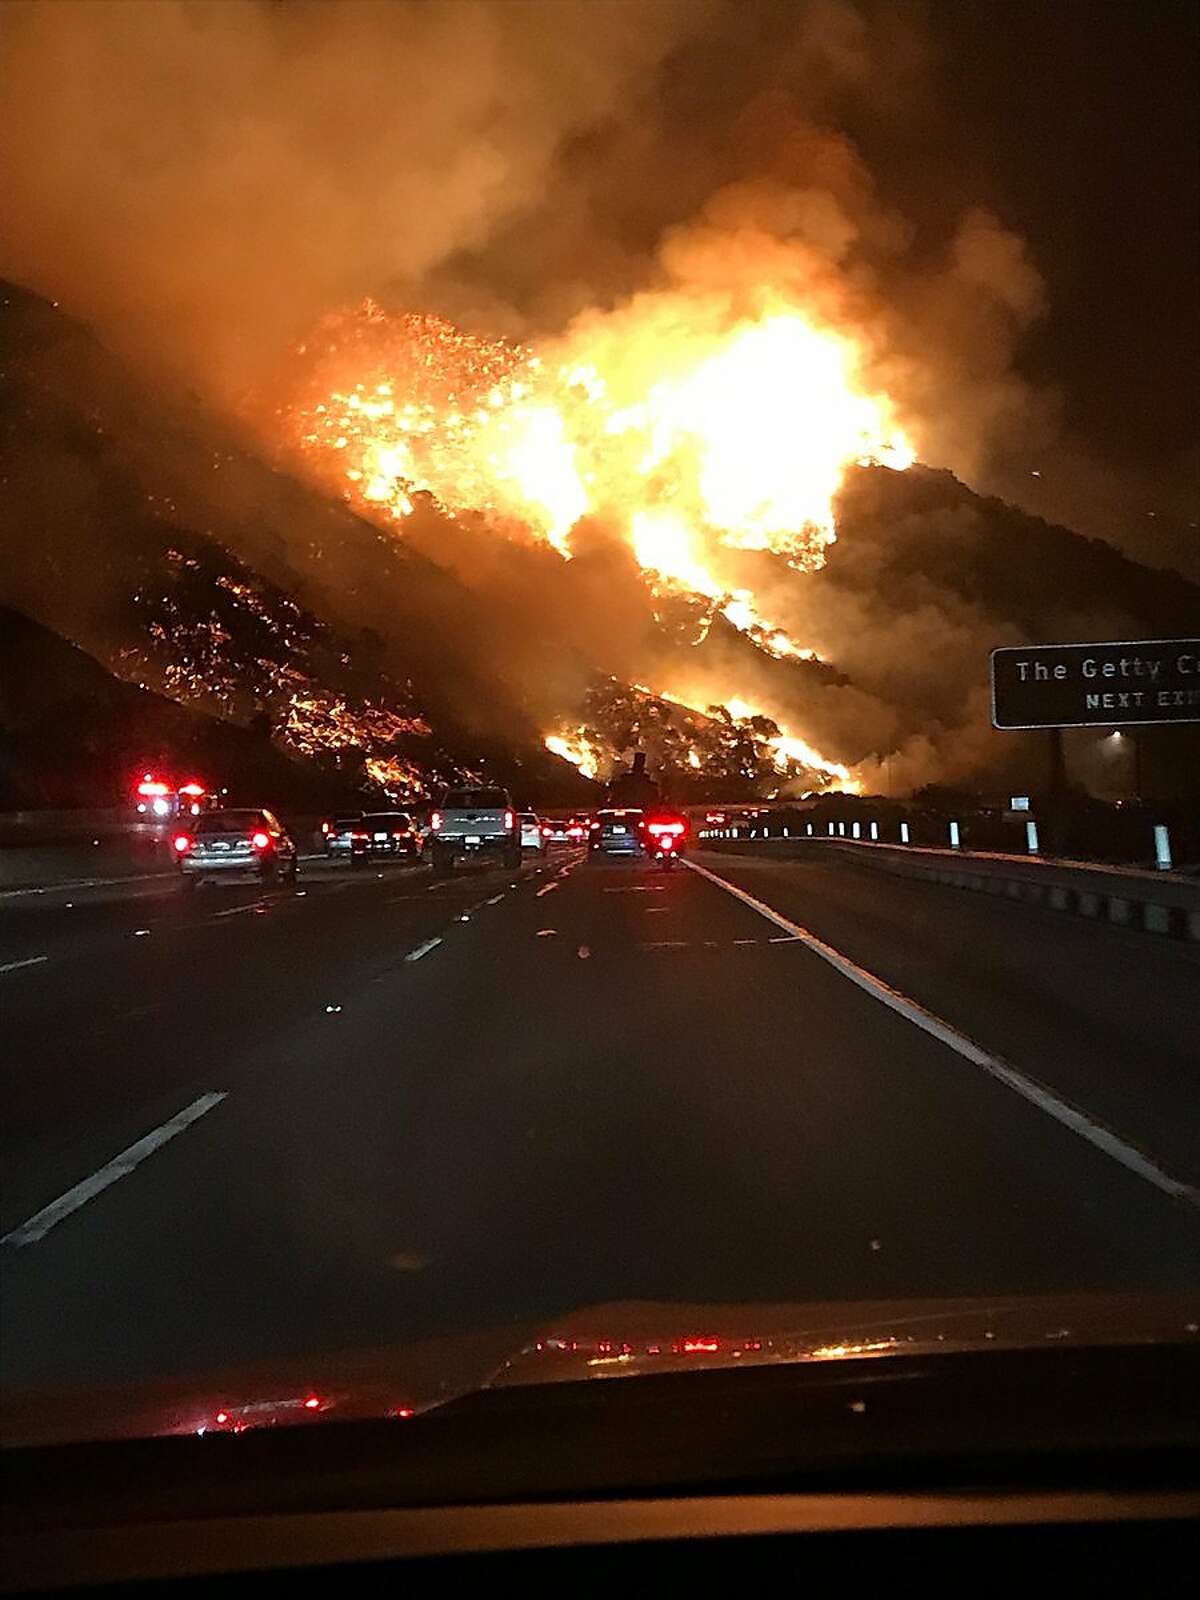 A view of the Skirball Fire from southbound 405. The fire is tearing through Bel-Air and forcing mandatory evacuations in the area.